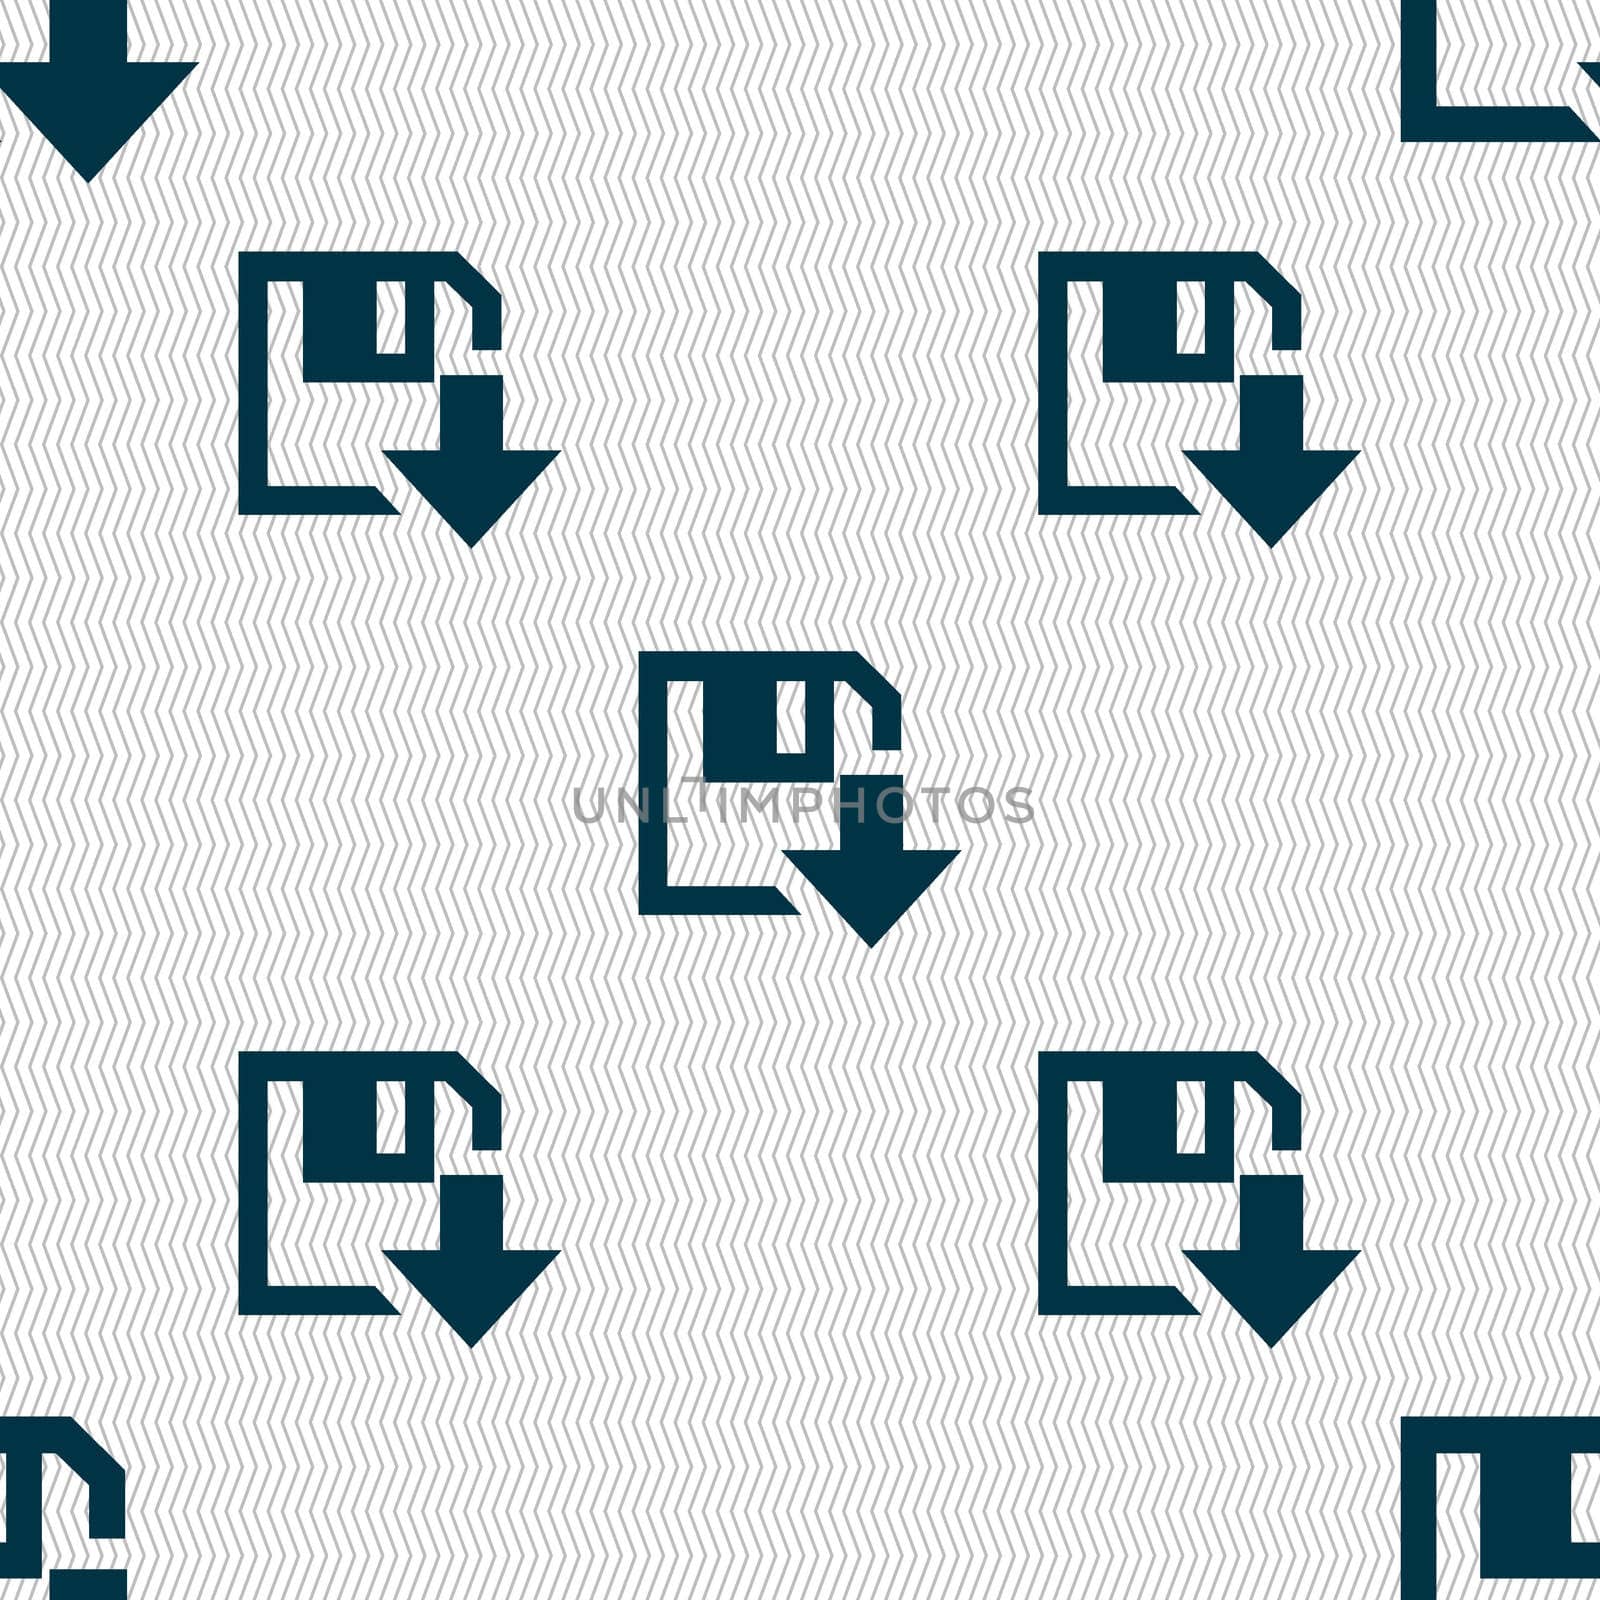 floppy icon. Flat modern design. Seamless abstract background with geometric shapes. illustration